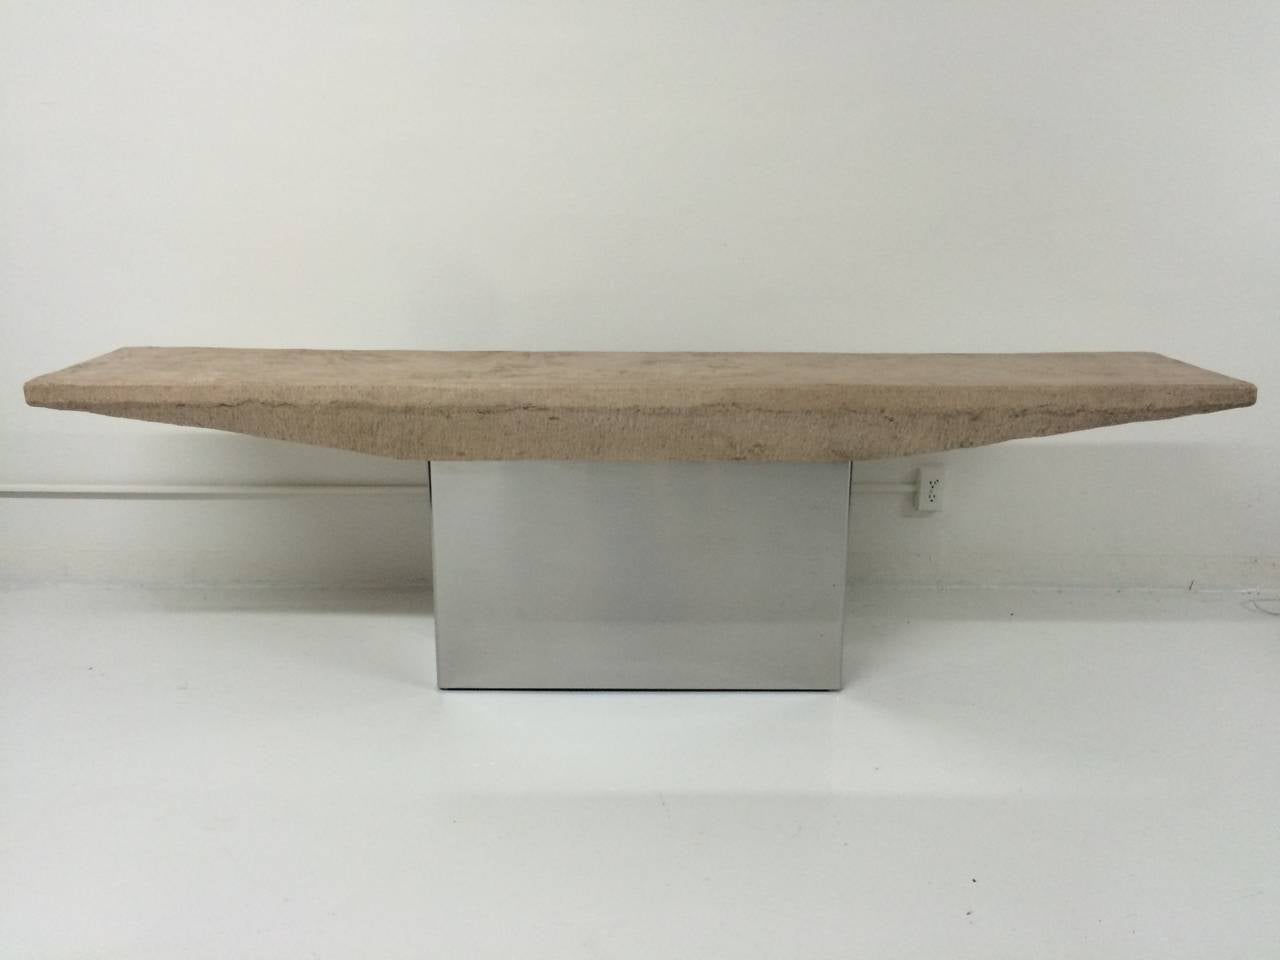 Mirror polished stainless steel and stone composition console table.